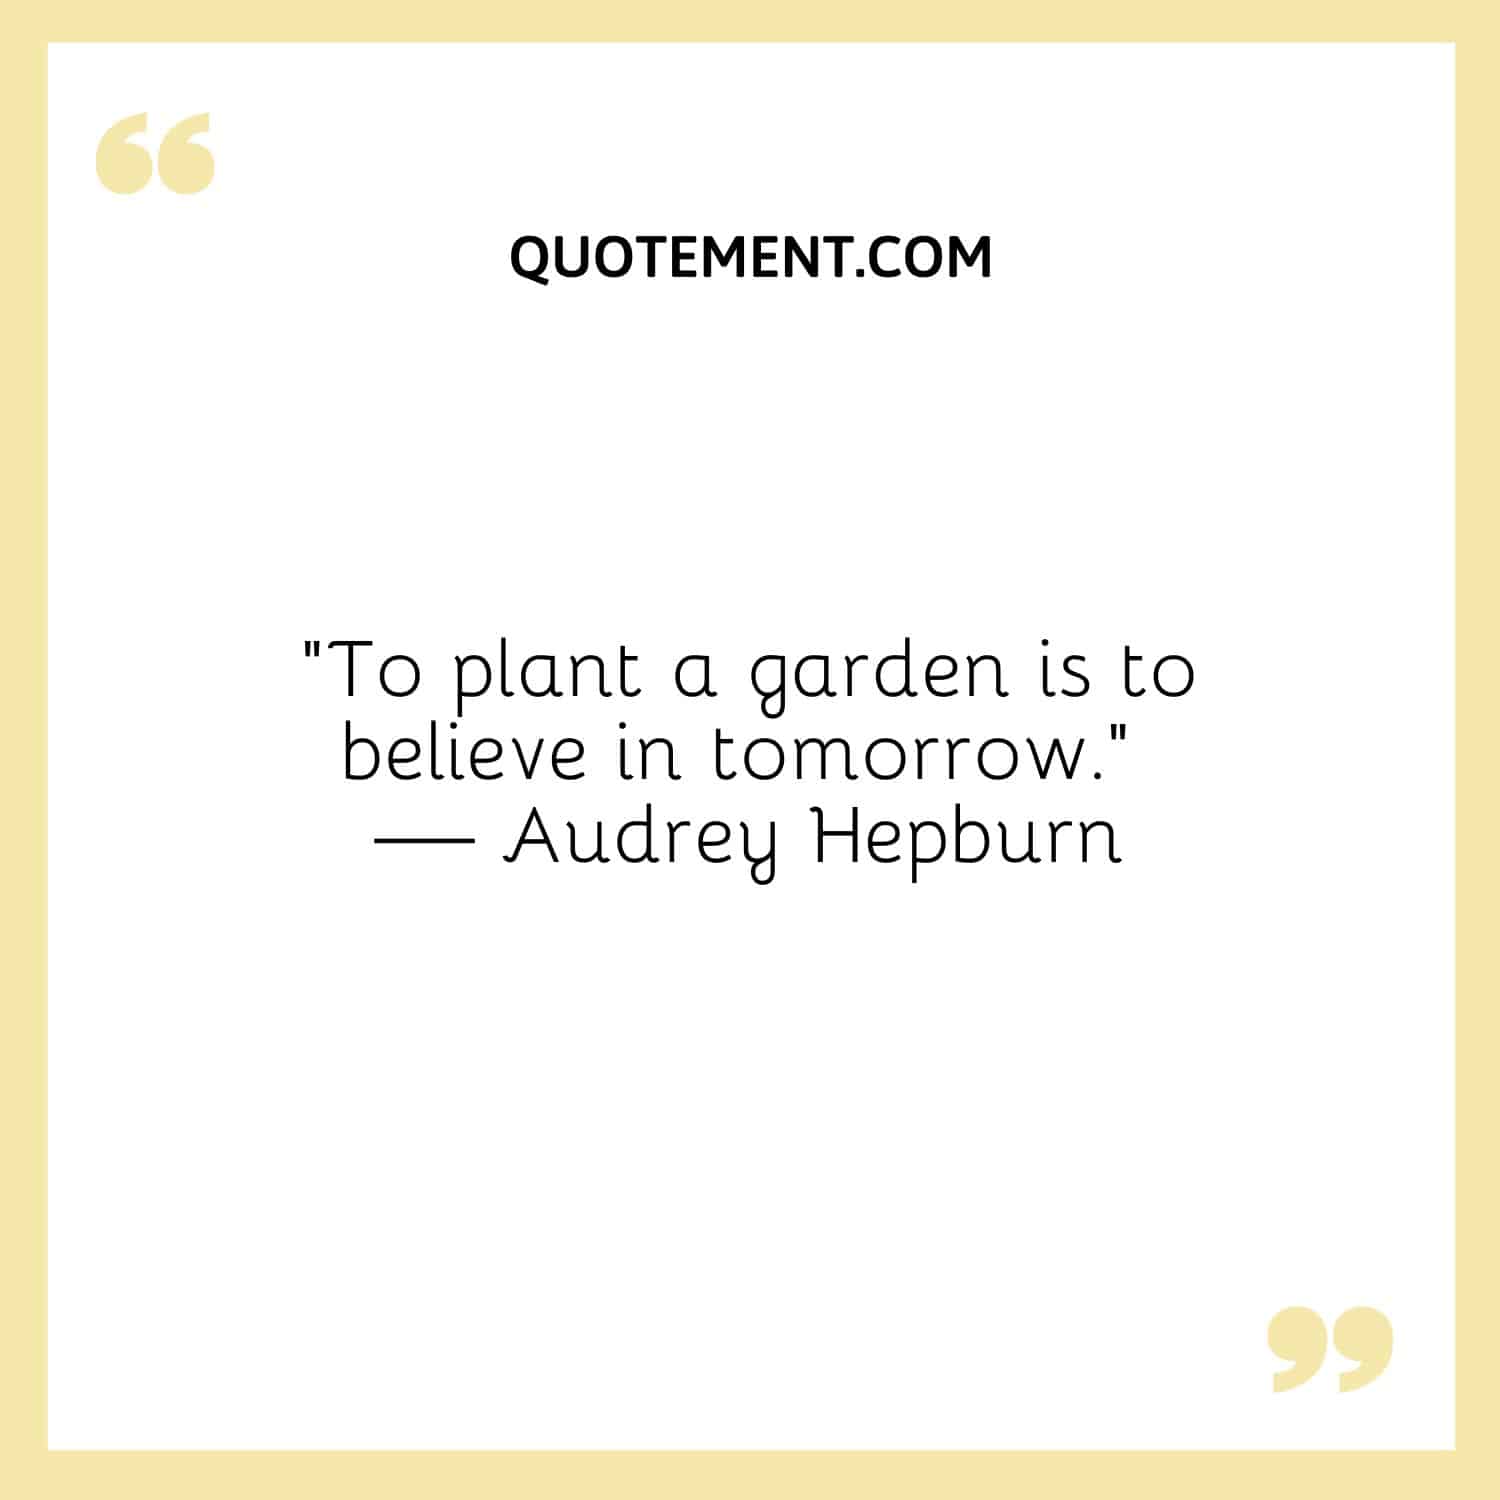 To plant a garden is to believe in tomorrow